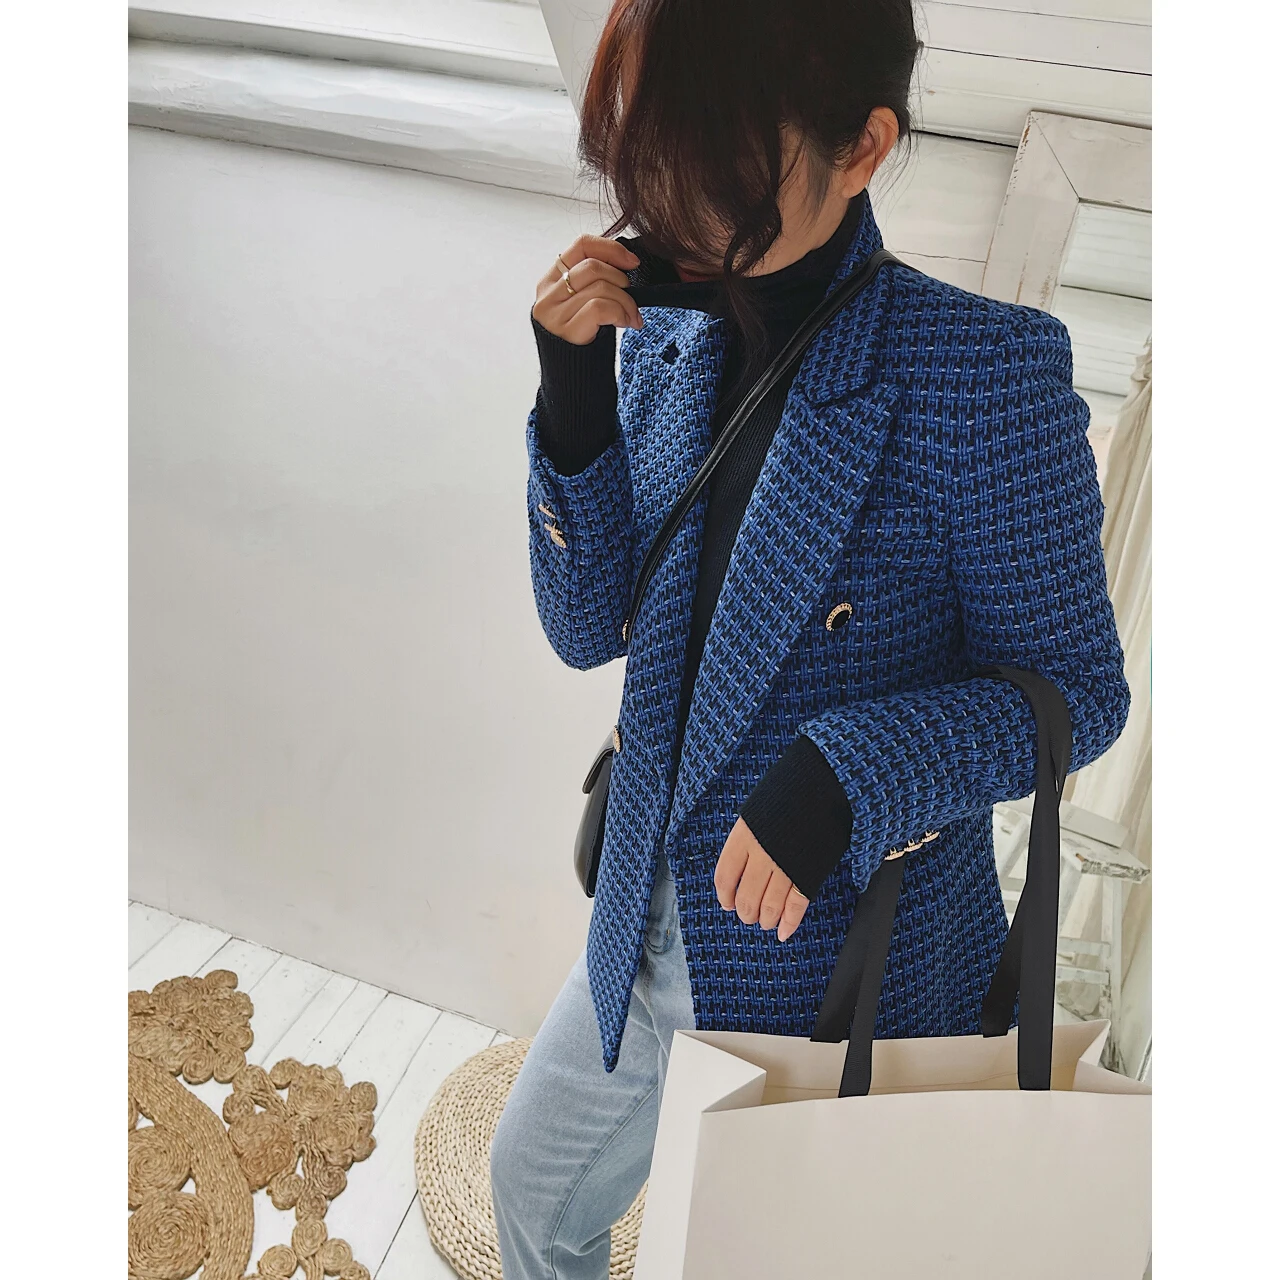 2022 Woman Tweed Blazers Suits Coats Jackets Za Oem Tailoring Overcoat Fashion Chic Elegant New Collection Stylish Clothing Y2k